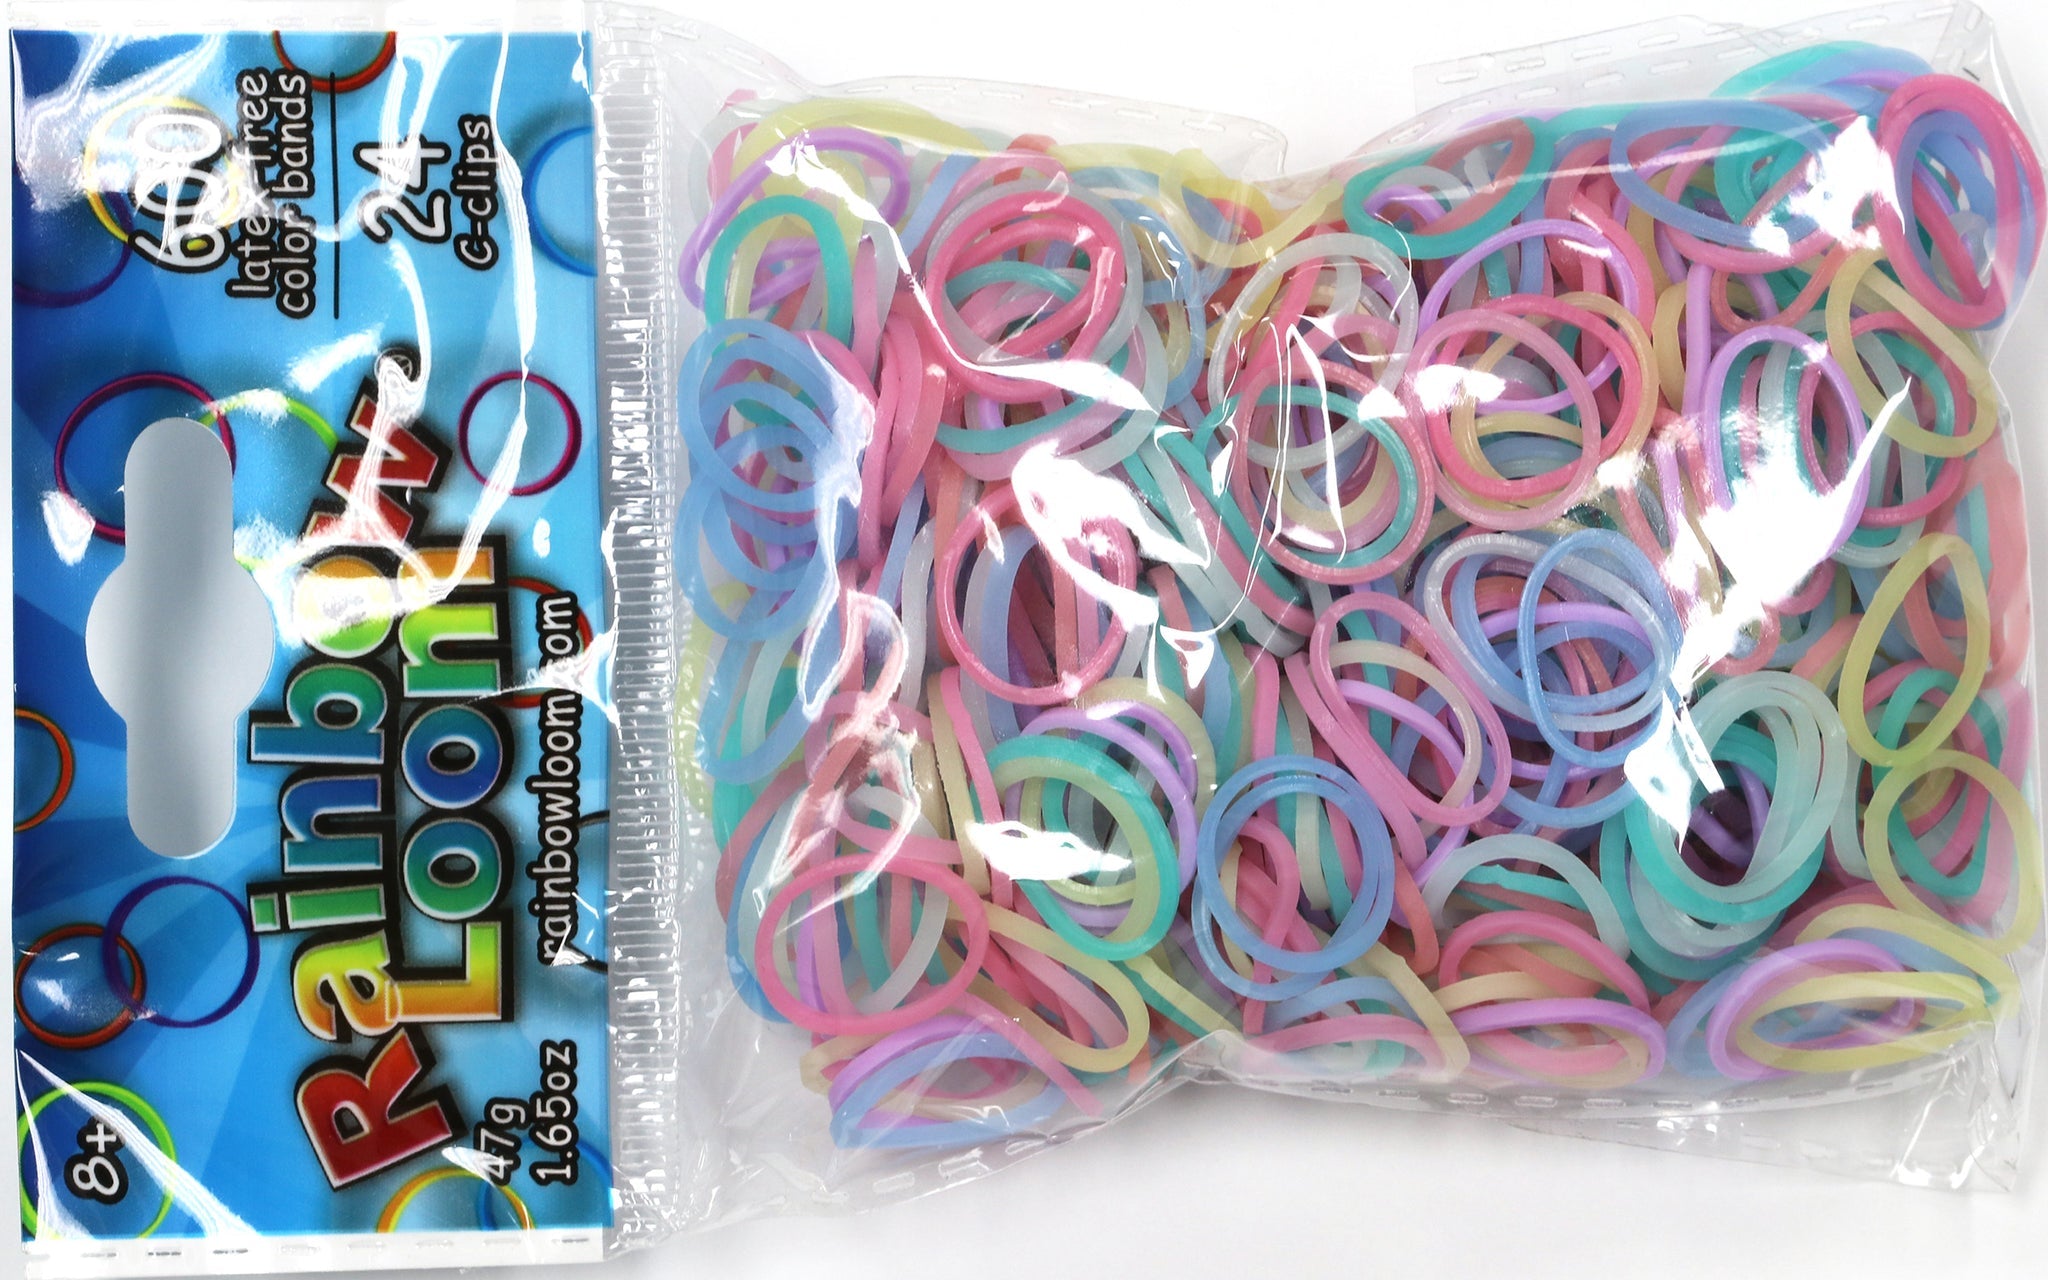 S Clips Rubber Band Clips,500 Pieces Colorful Loom Rubber Band